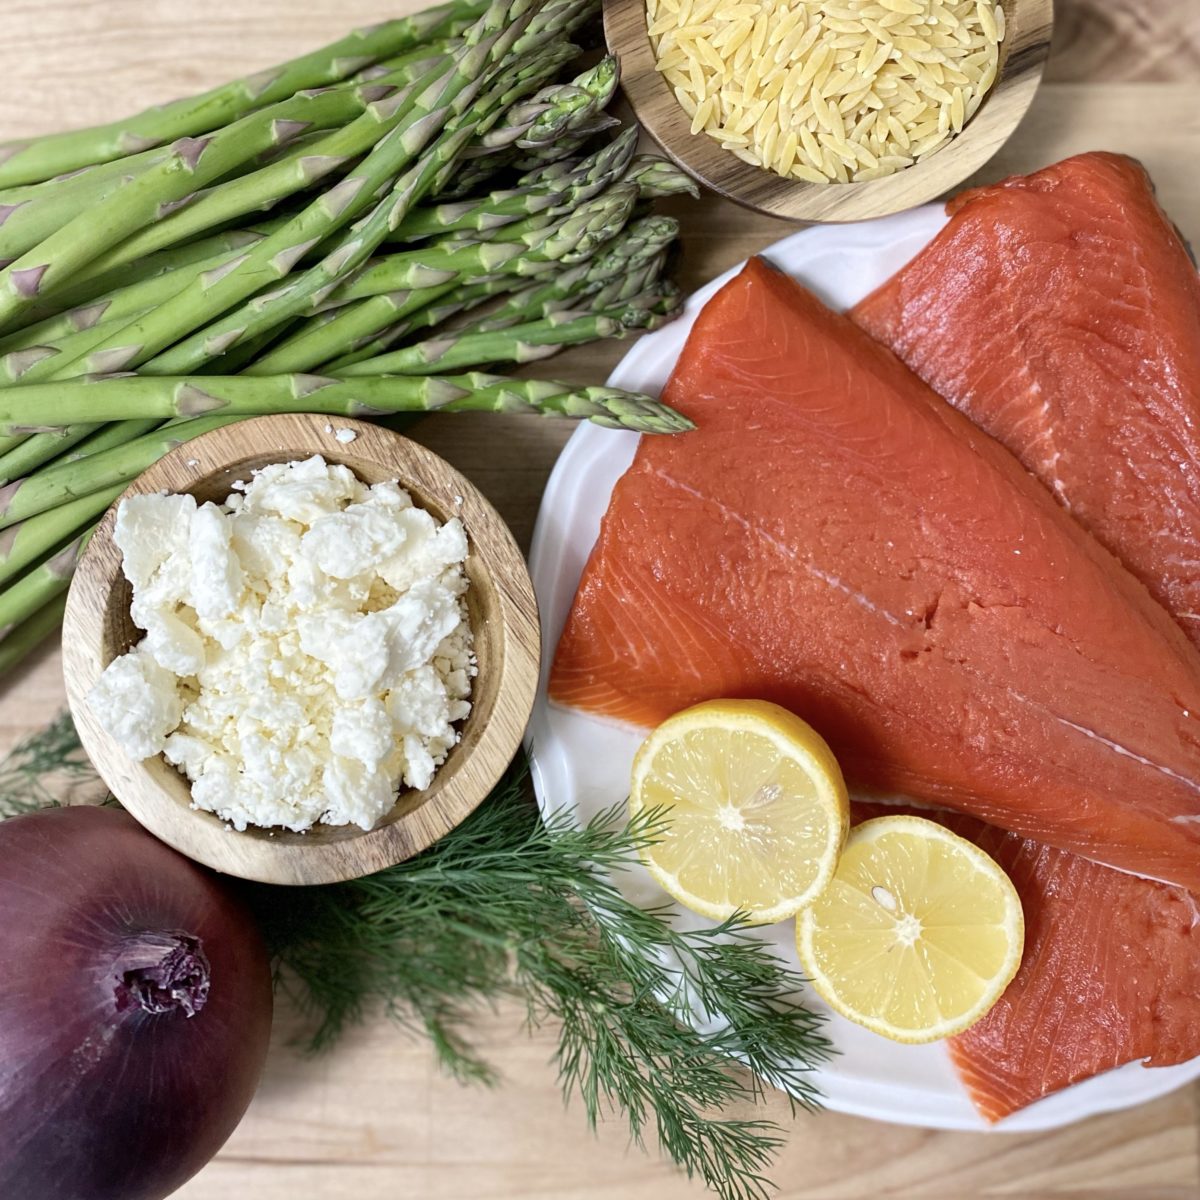 Ingredients for salmon, asparagus, and dill orzo salad including, salmon, fresh dill, asparagus, lemon, feta cheese, and orzo.